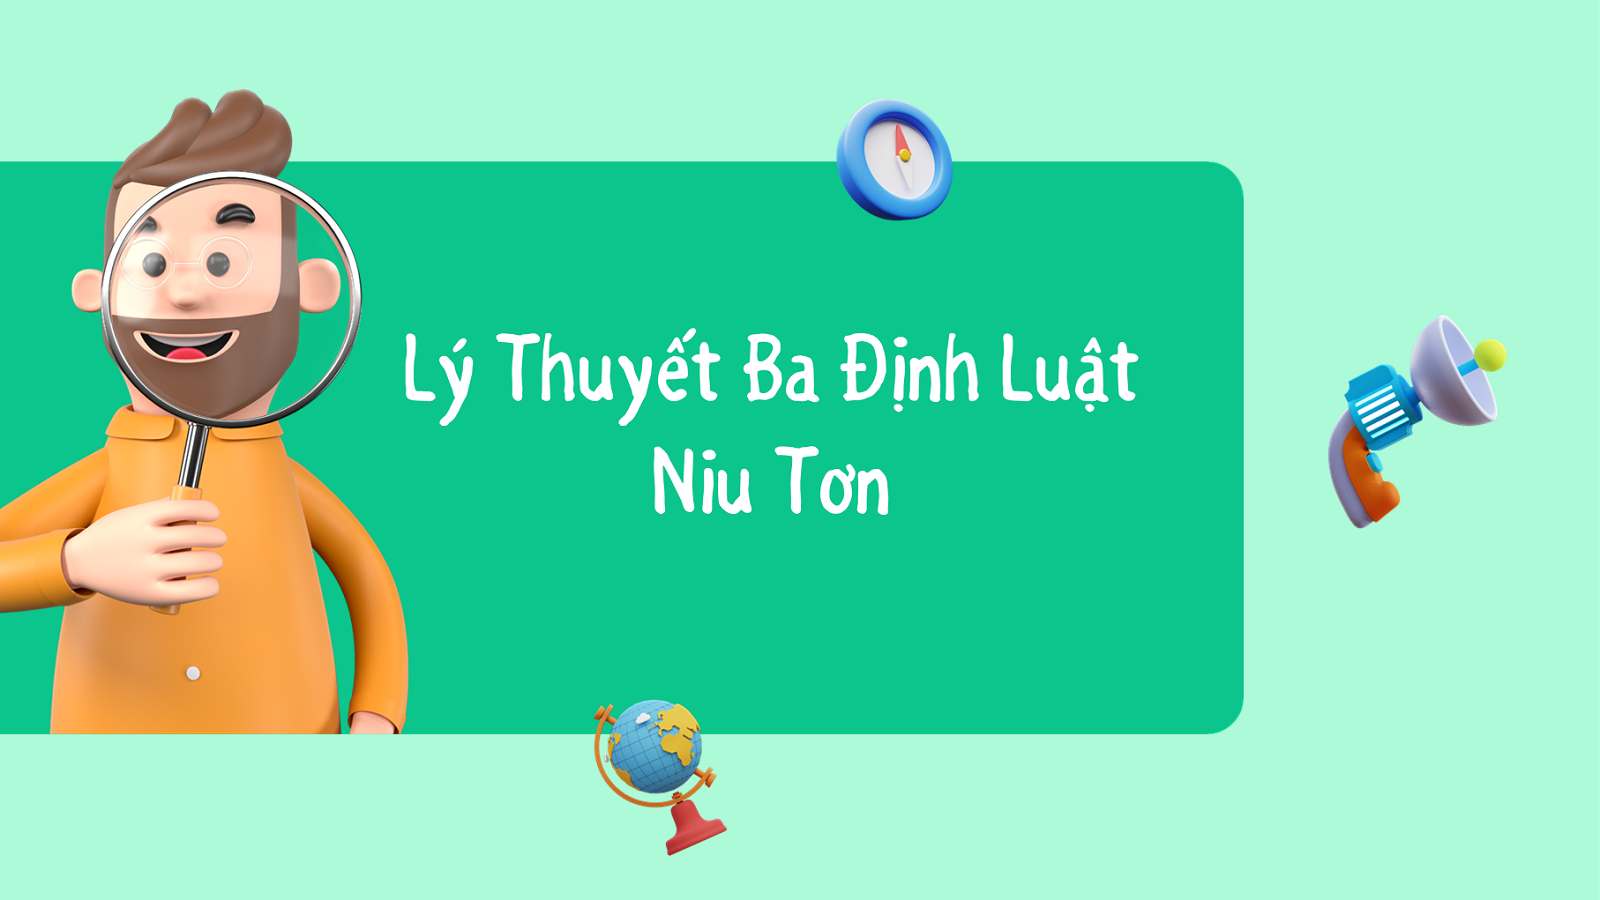 How is niu tơn related to Newton\'s three laws of motion?
